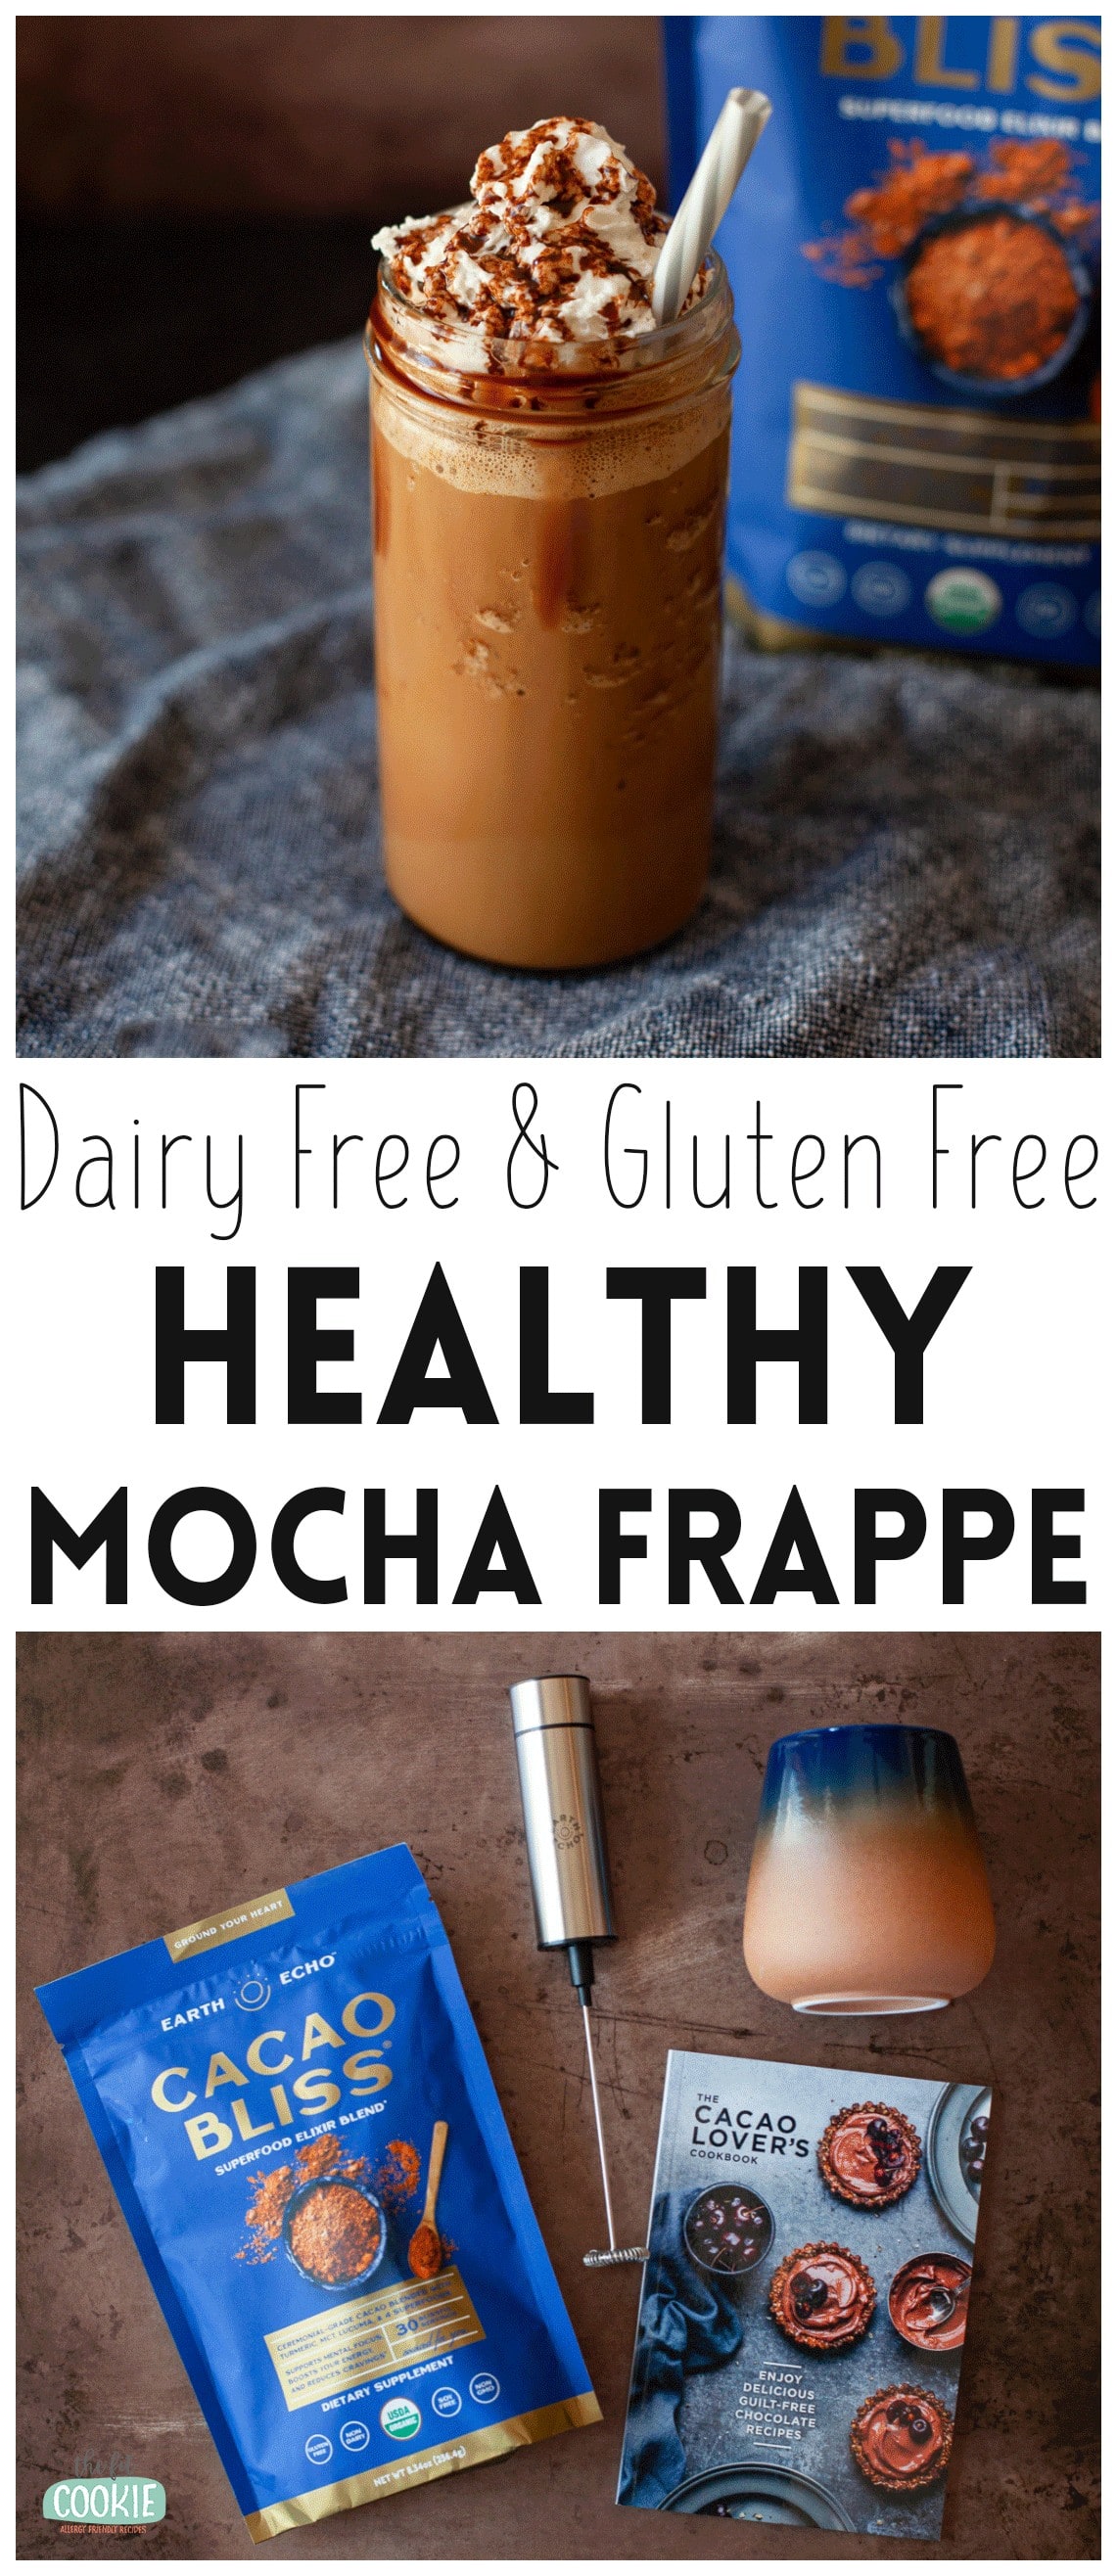 photo collage of healthy mocha frappe